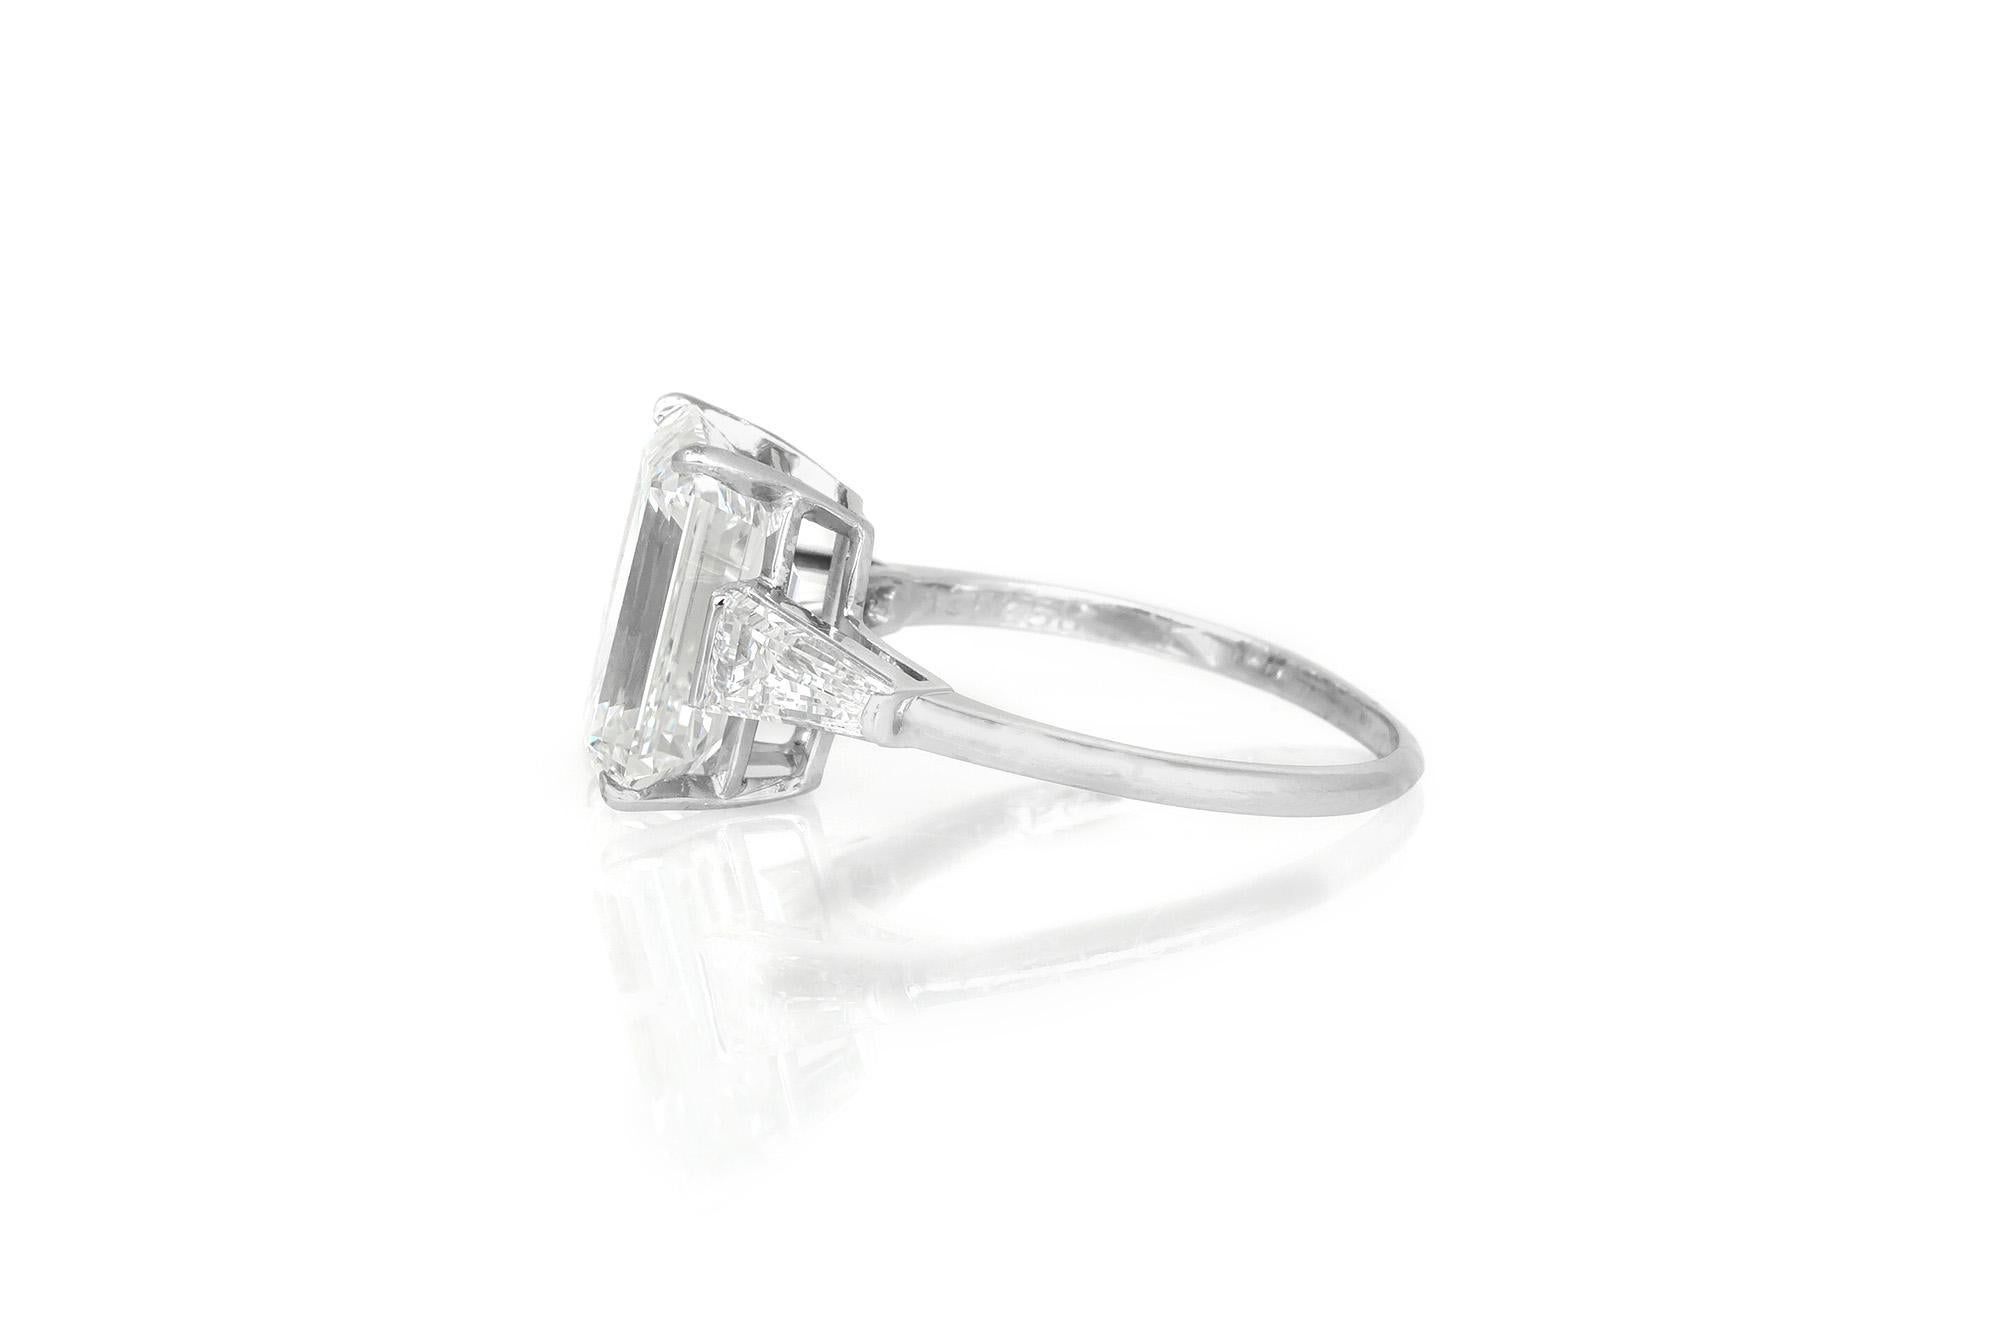 5.31 Carat Emerald Cut Diamond Engagement Ring In Good Condition For Sale In New York, NY